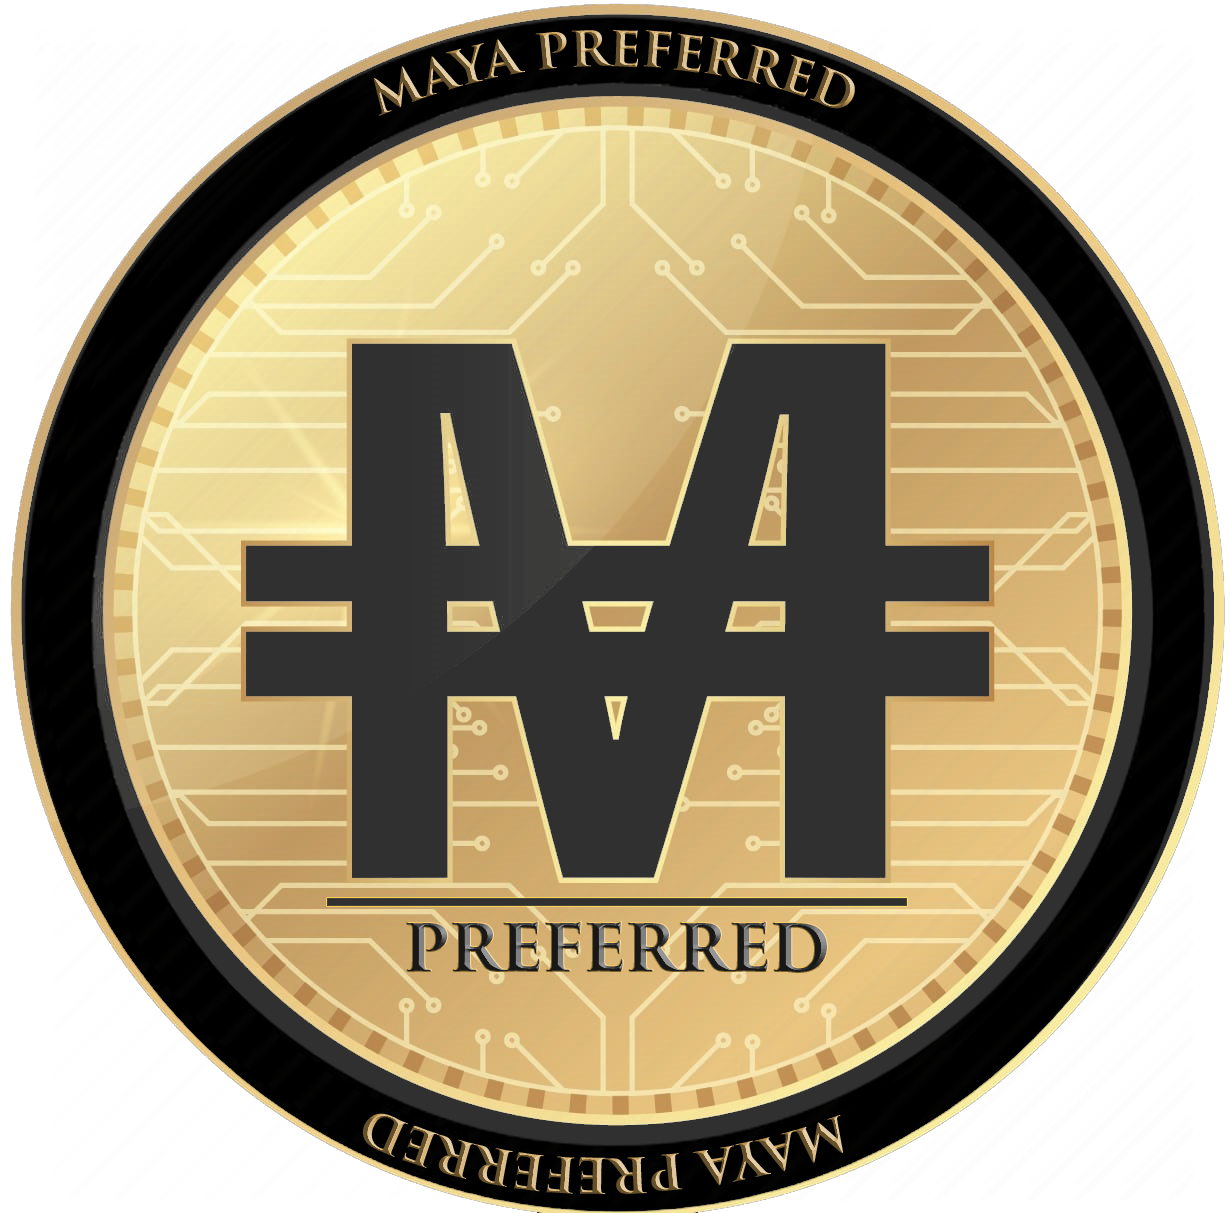 Maya Preferred 223 proves Bitcoin is now backed with real Gold and Silver assets